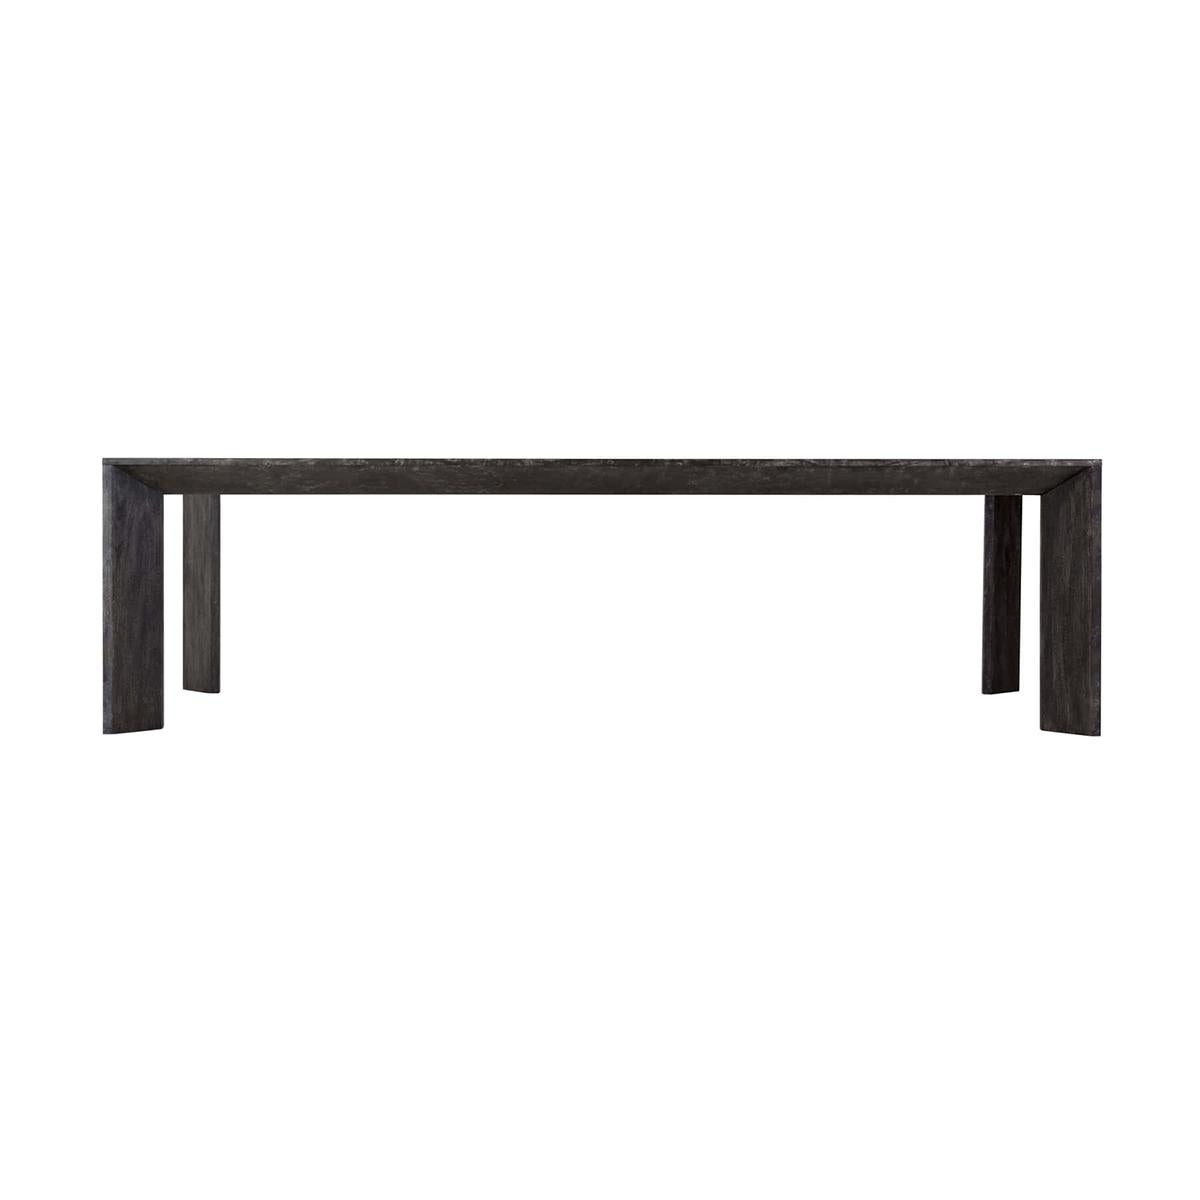 A large modern ember oak dining table to seat 8 or more people. A sleek clean-lined design fitting well within today's modern decor kitchen or dining room. A highly sought-after style with a modern minimalist look.

Dimensions: 107.75